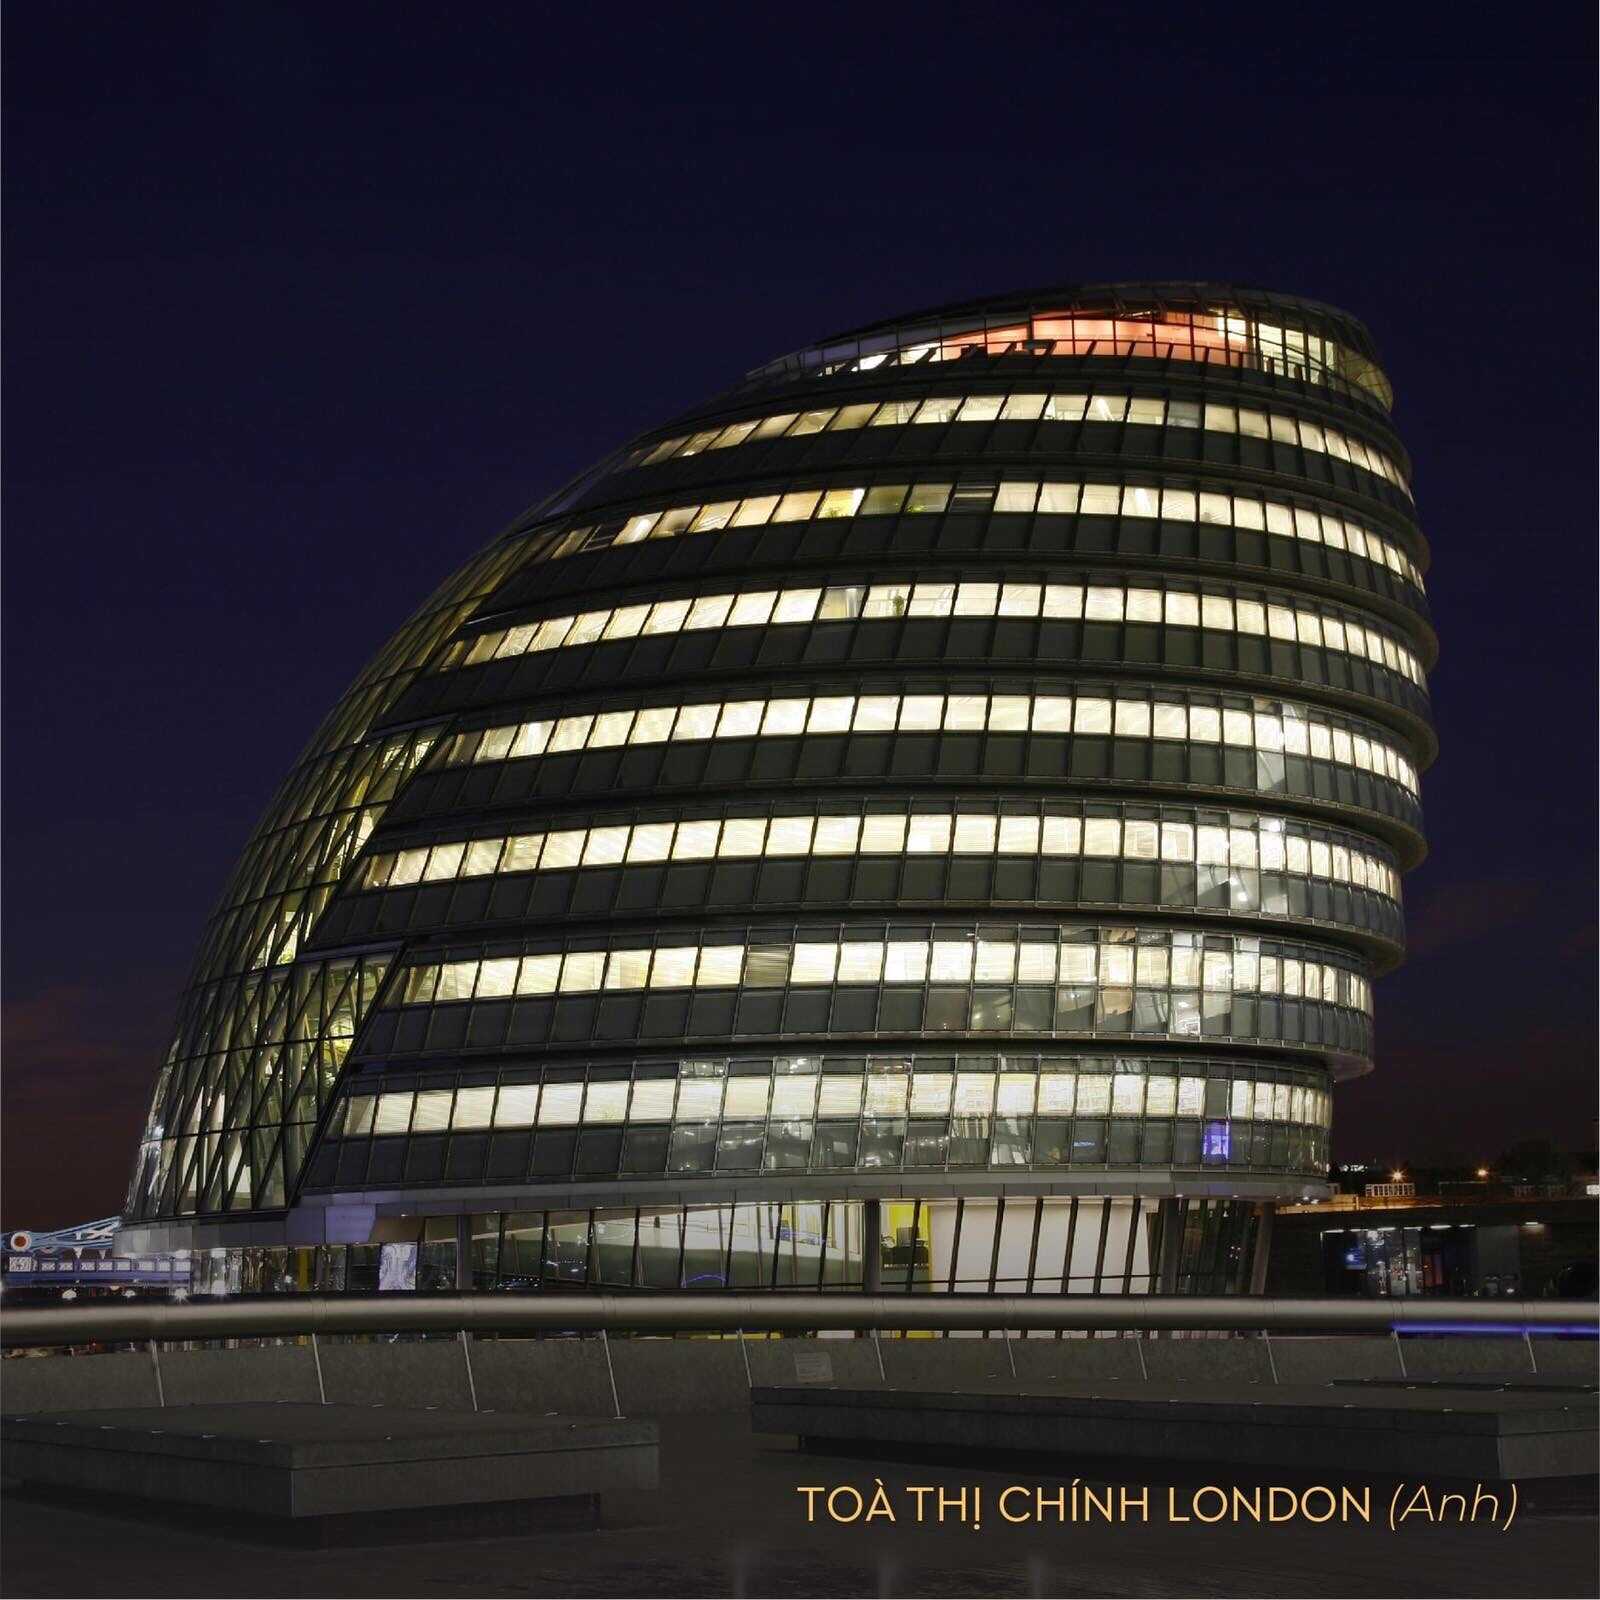 London City Hall in England